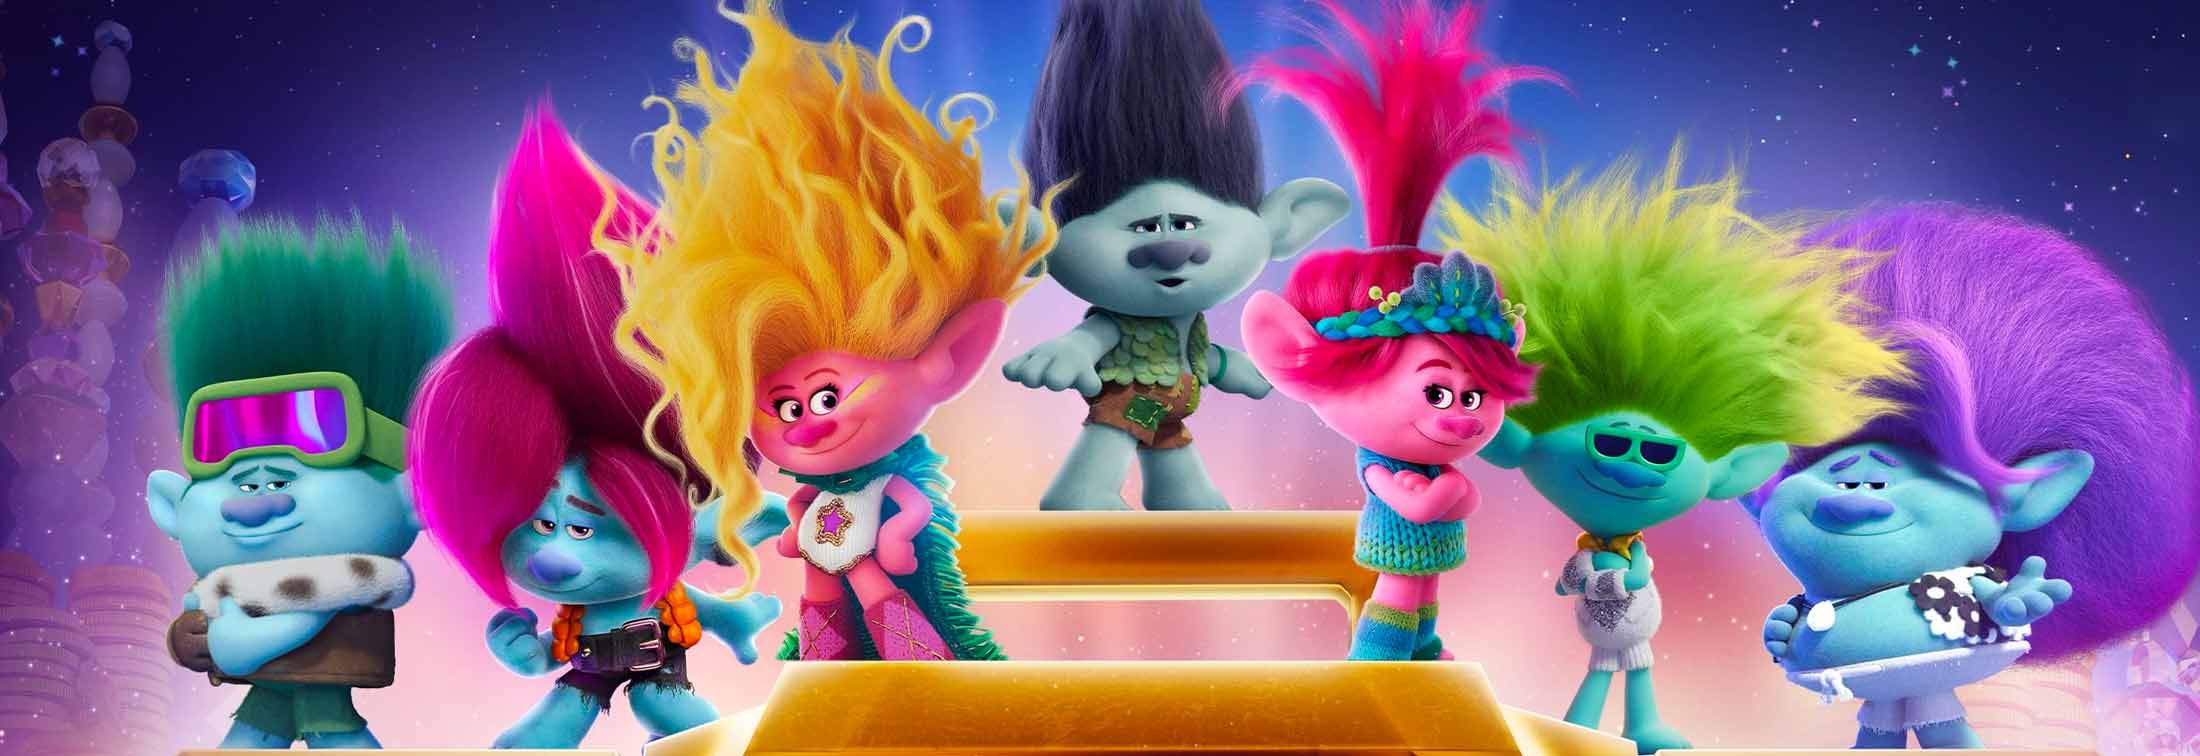 Trolls Band Together Review: Poppy and Branch back for a third trip ...